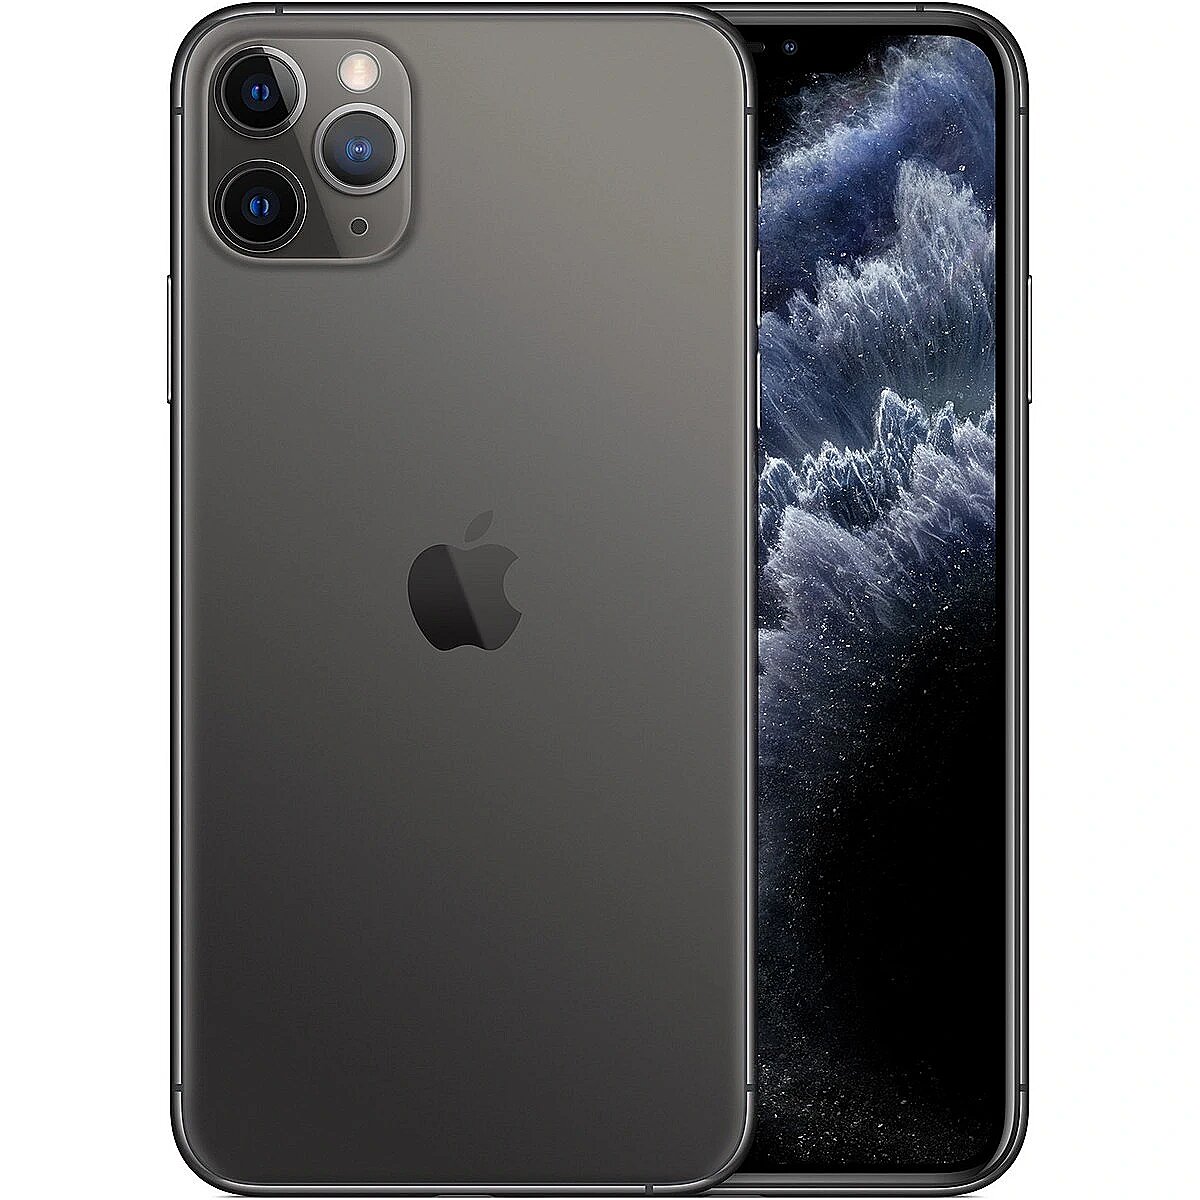 Apple iPhone 11 Pro, 512GB, Space Gray (MWCD2)